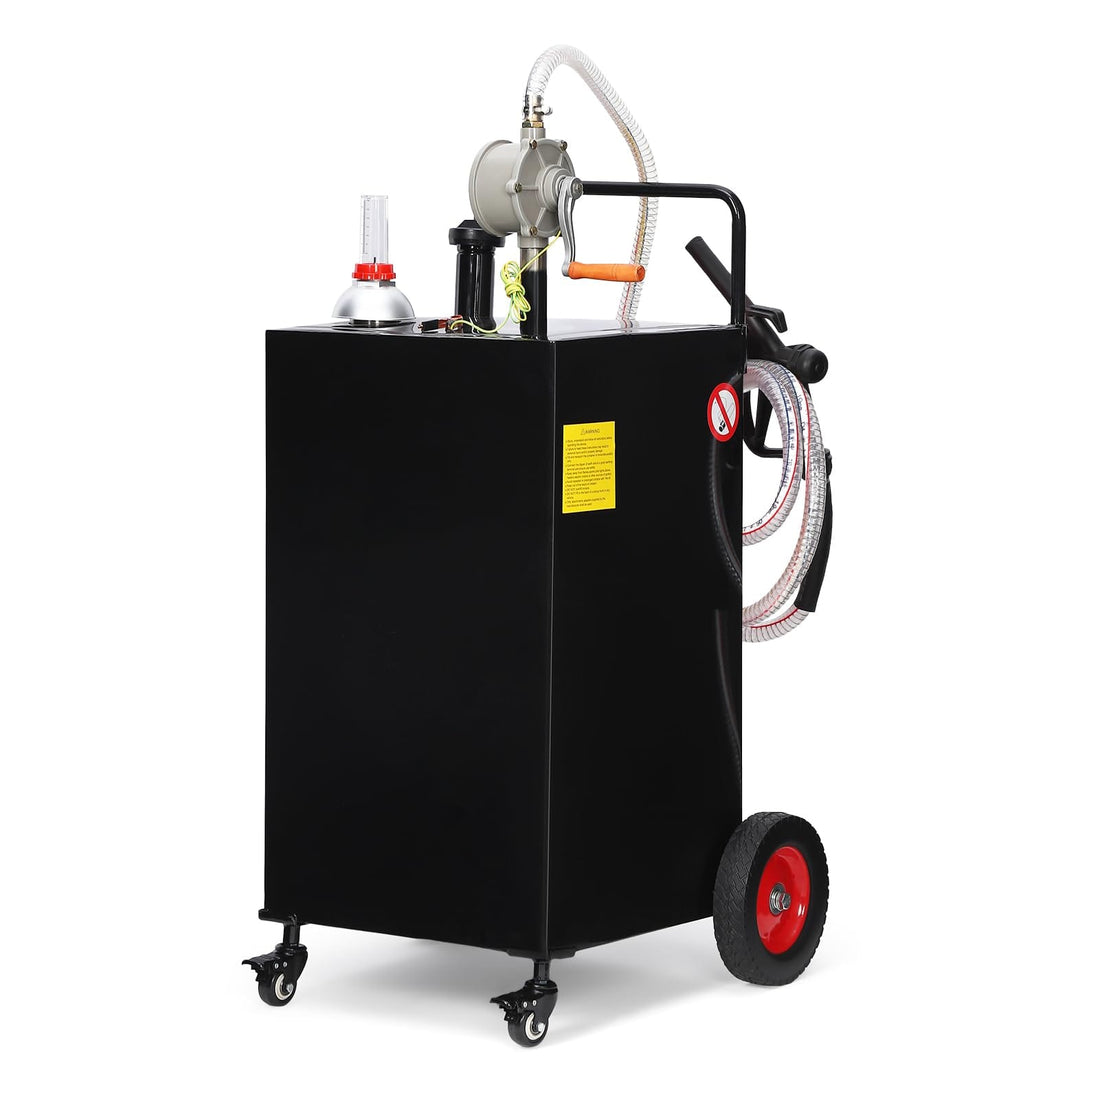 Stainless Steel Portable Fuel Caddy with Manual Pump & Wheels